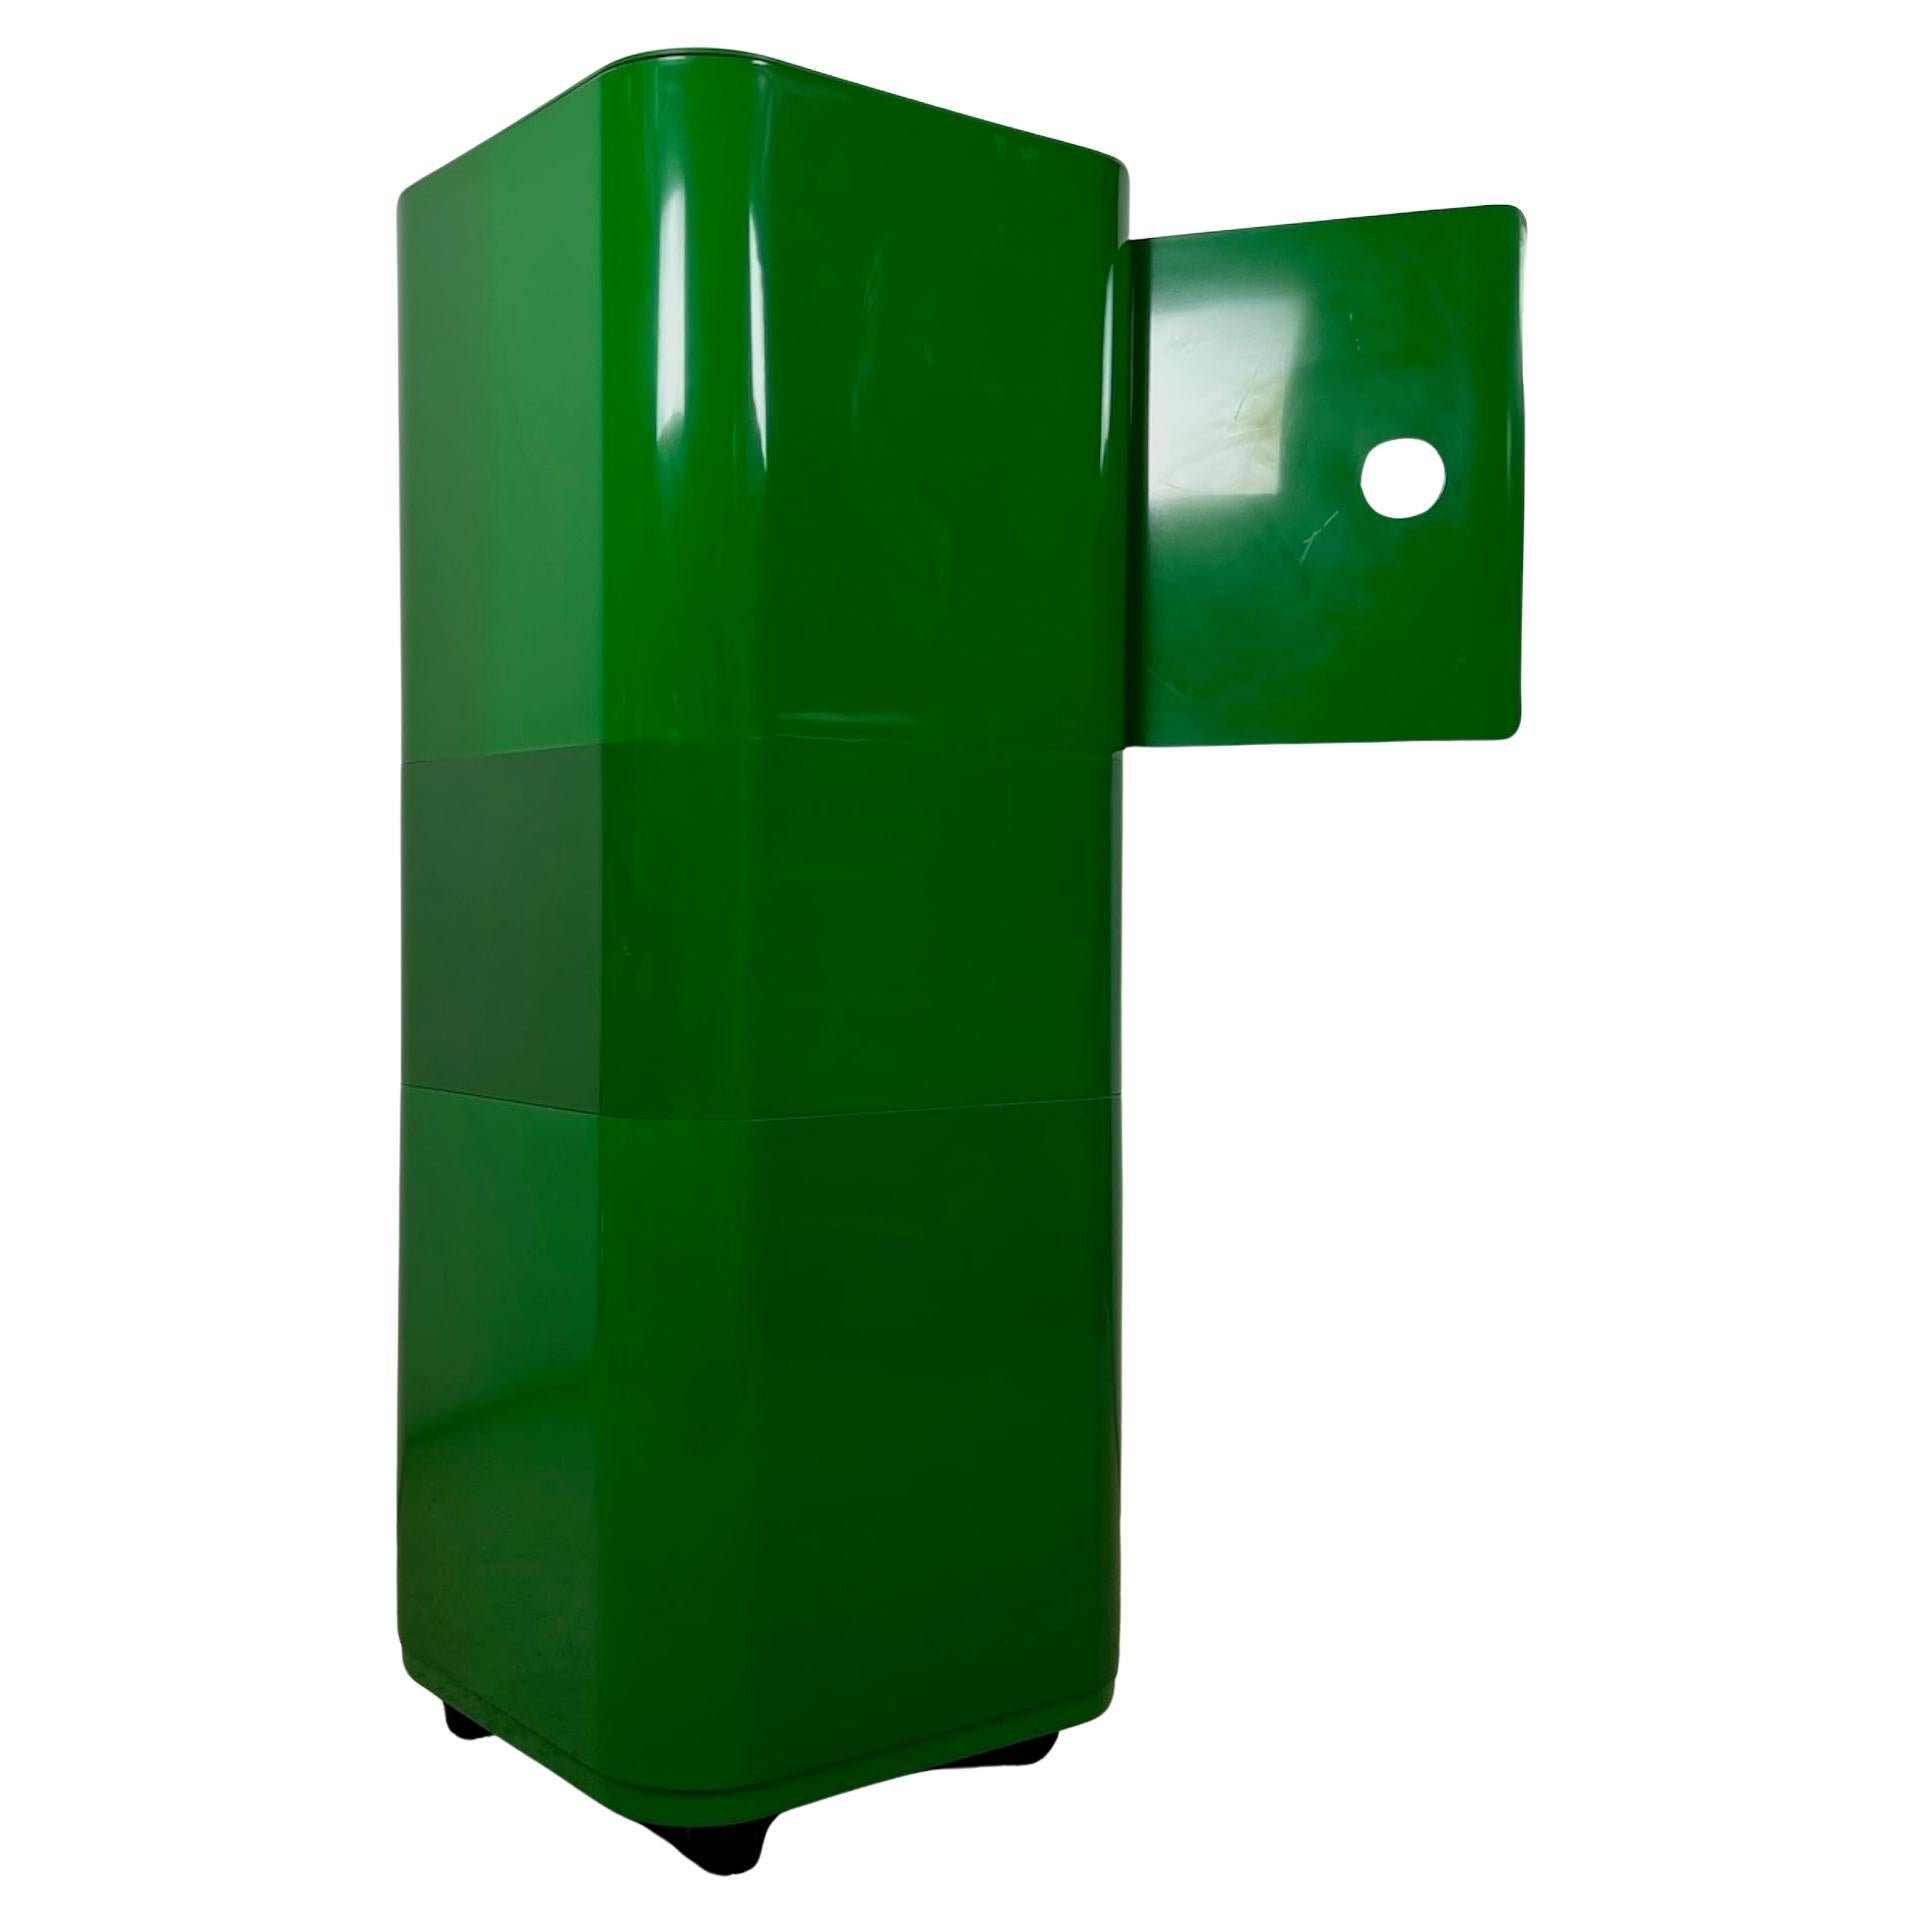 Space Age Green Squared Cabinet Kartell Componibili by Anna Castelli Ferrieri, 1960s